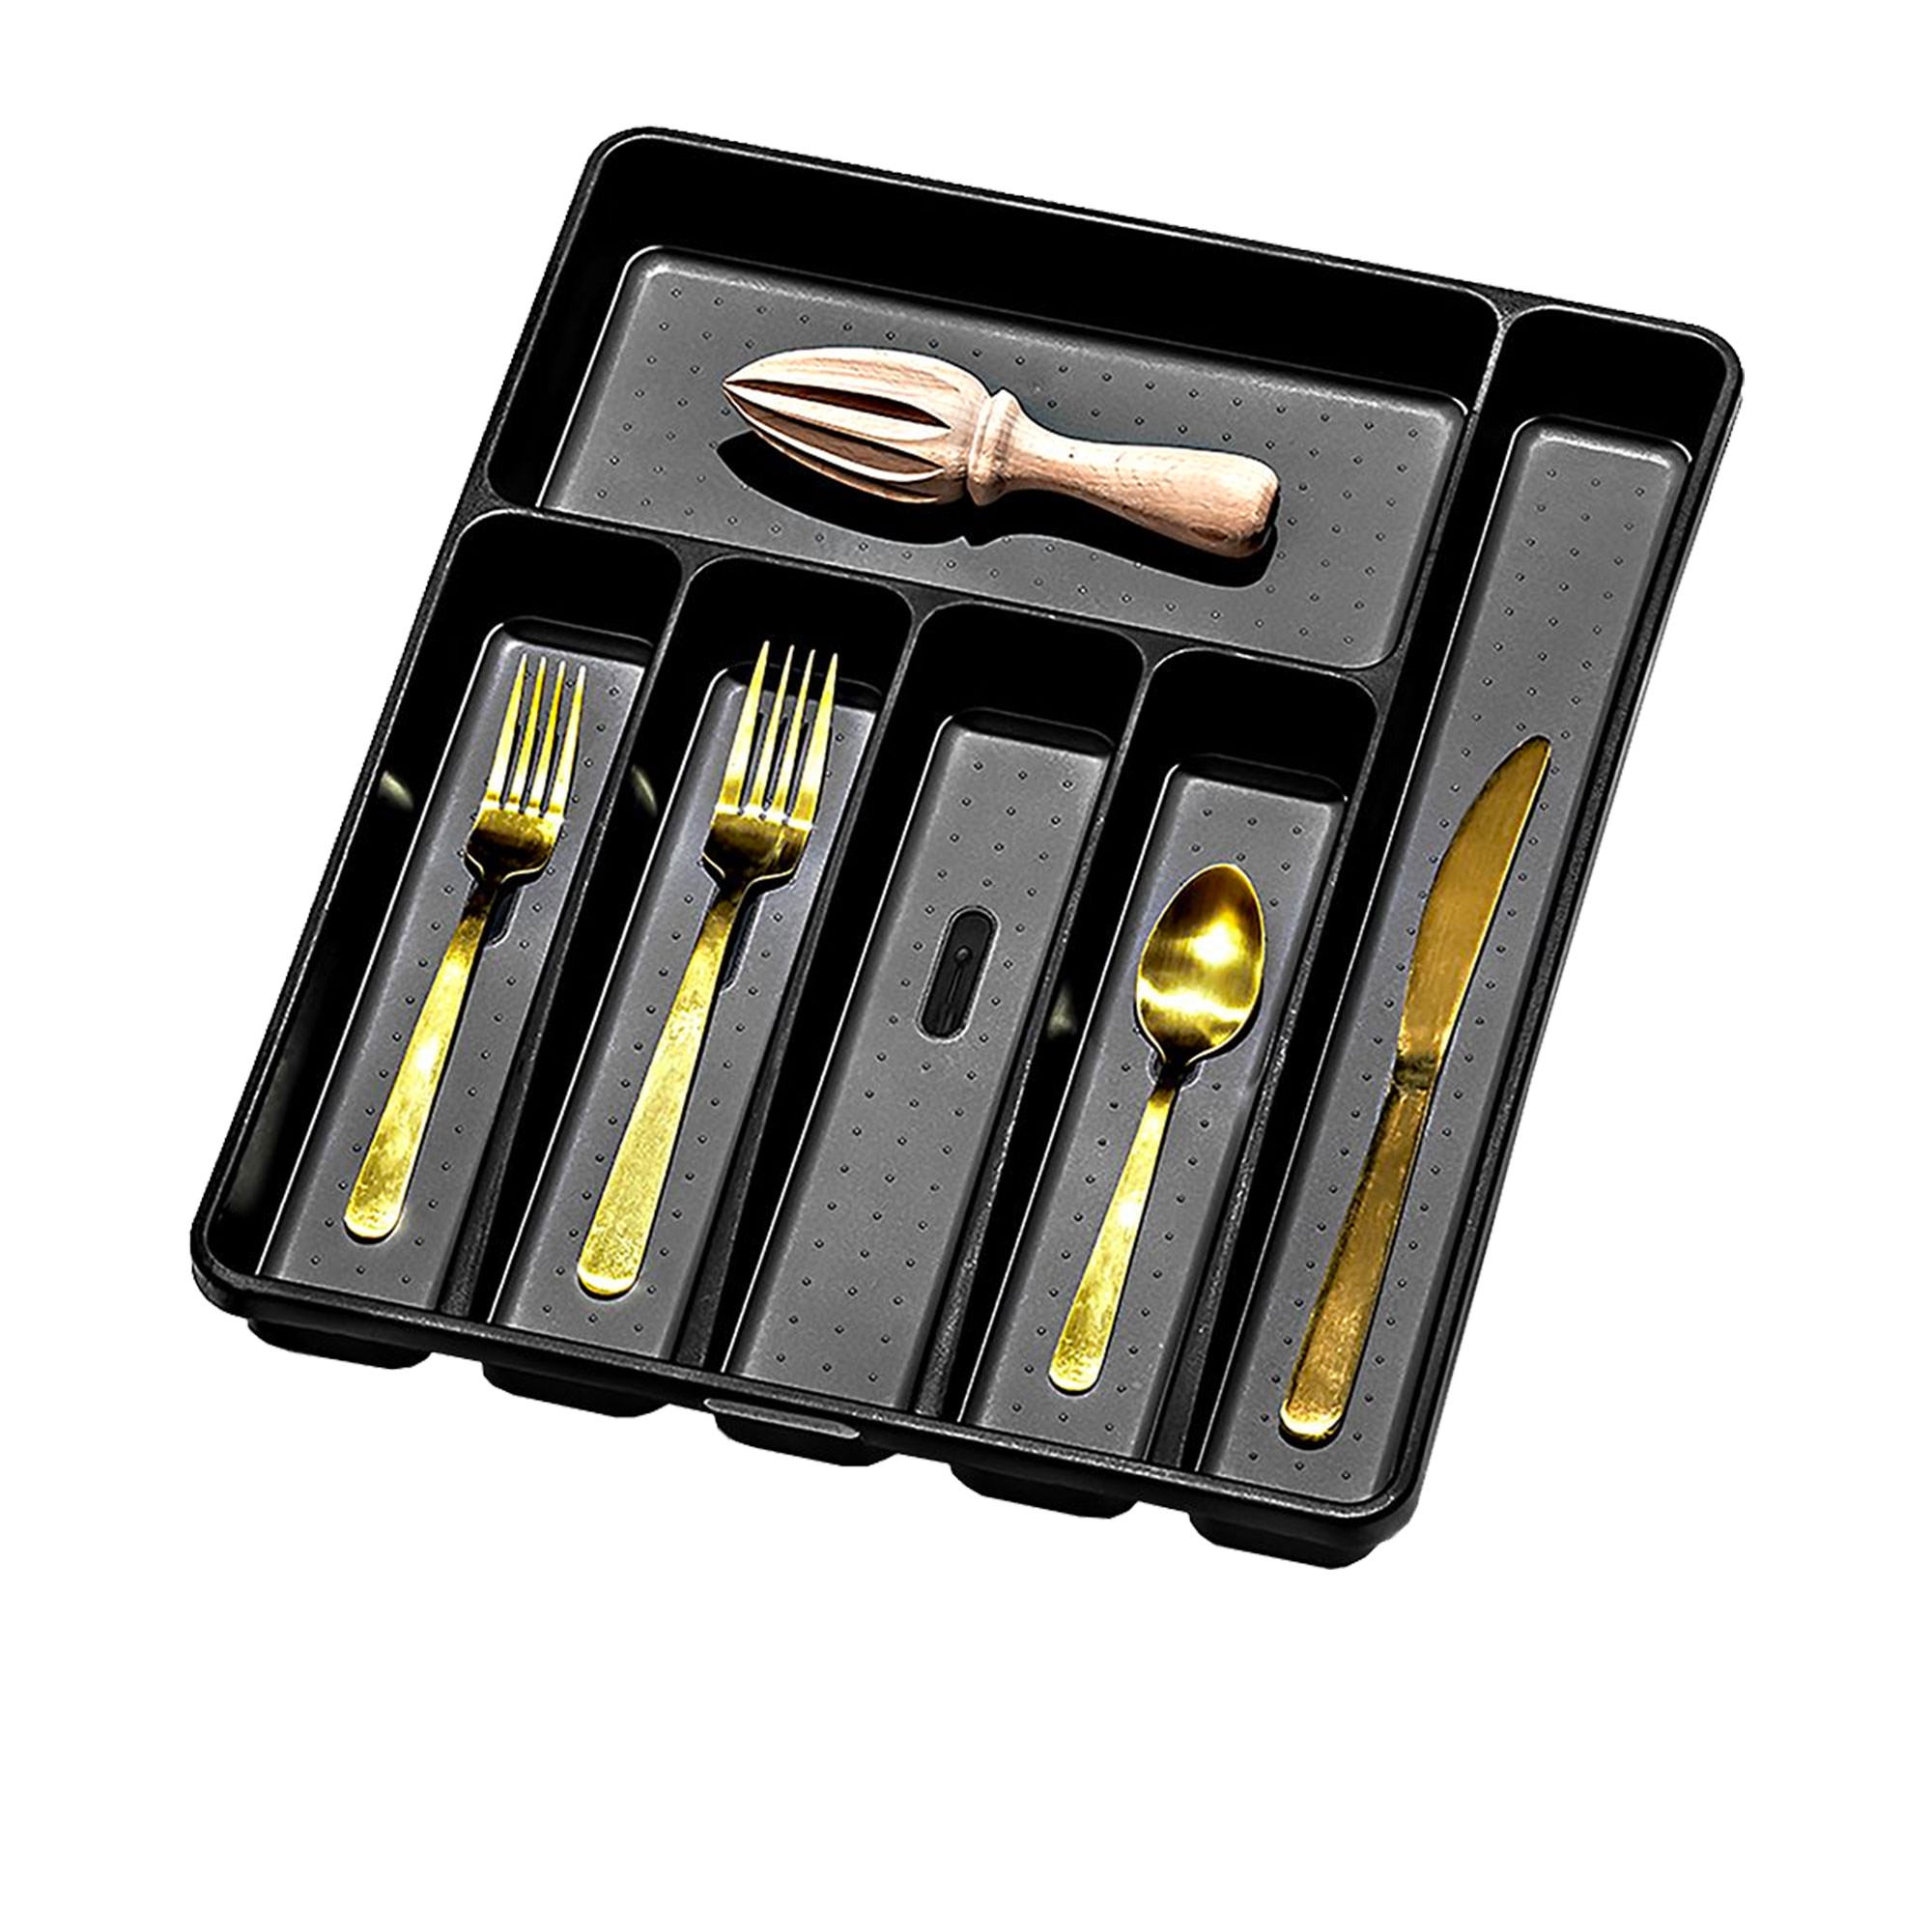 Madesmart Cutlery Tray 6 Compartment Carbon Image 2